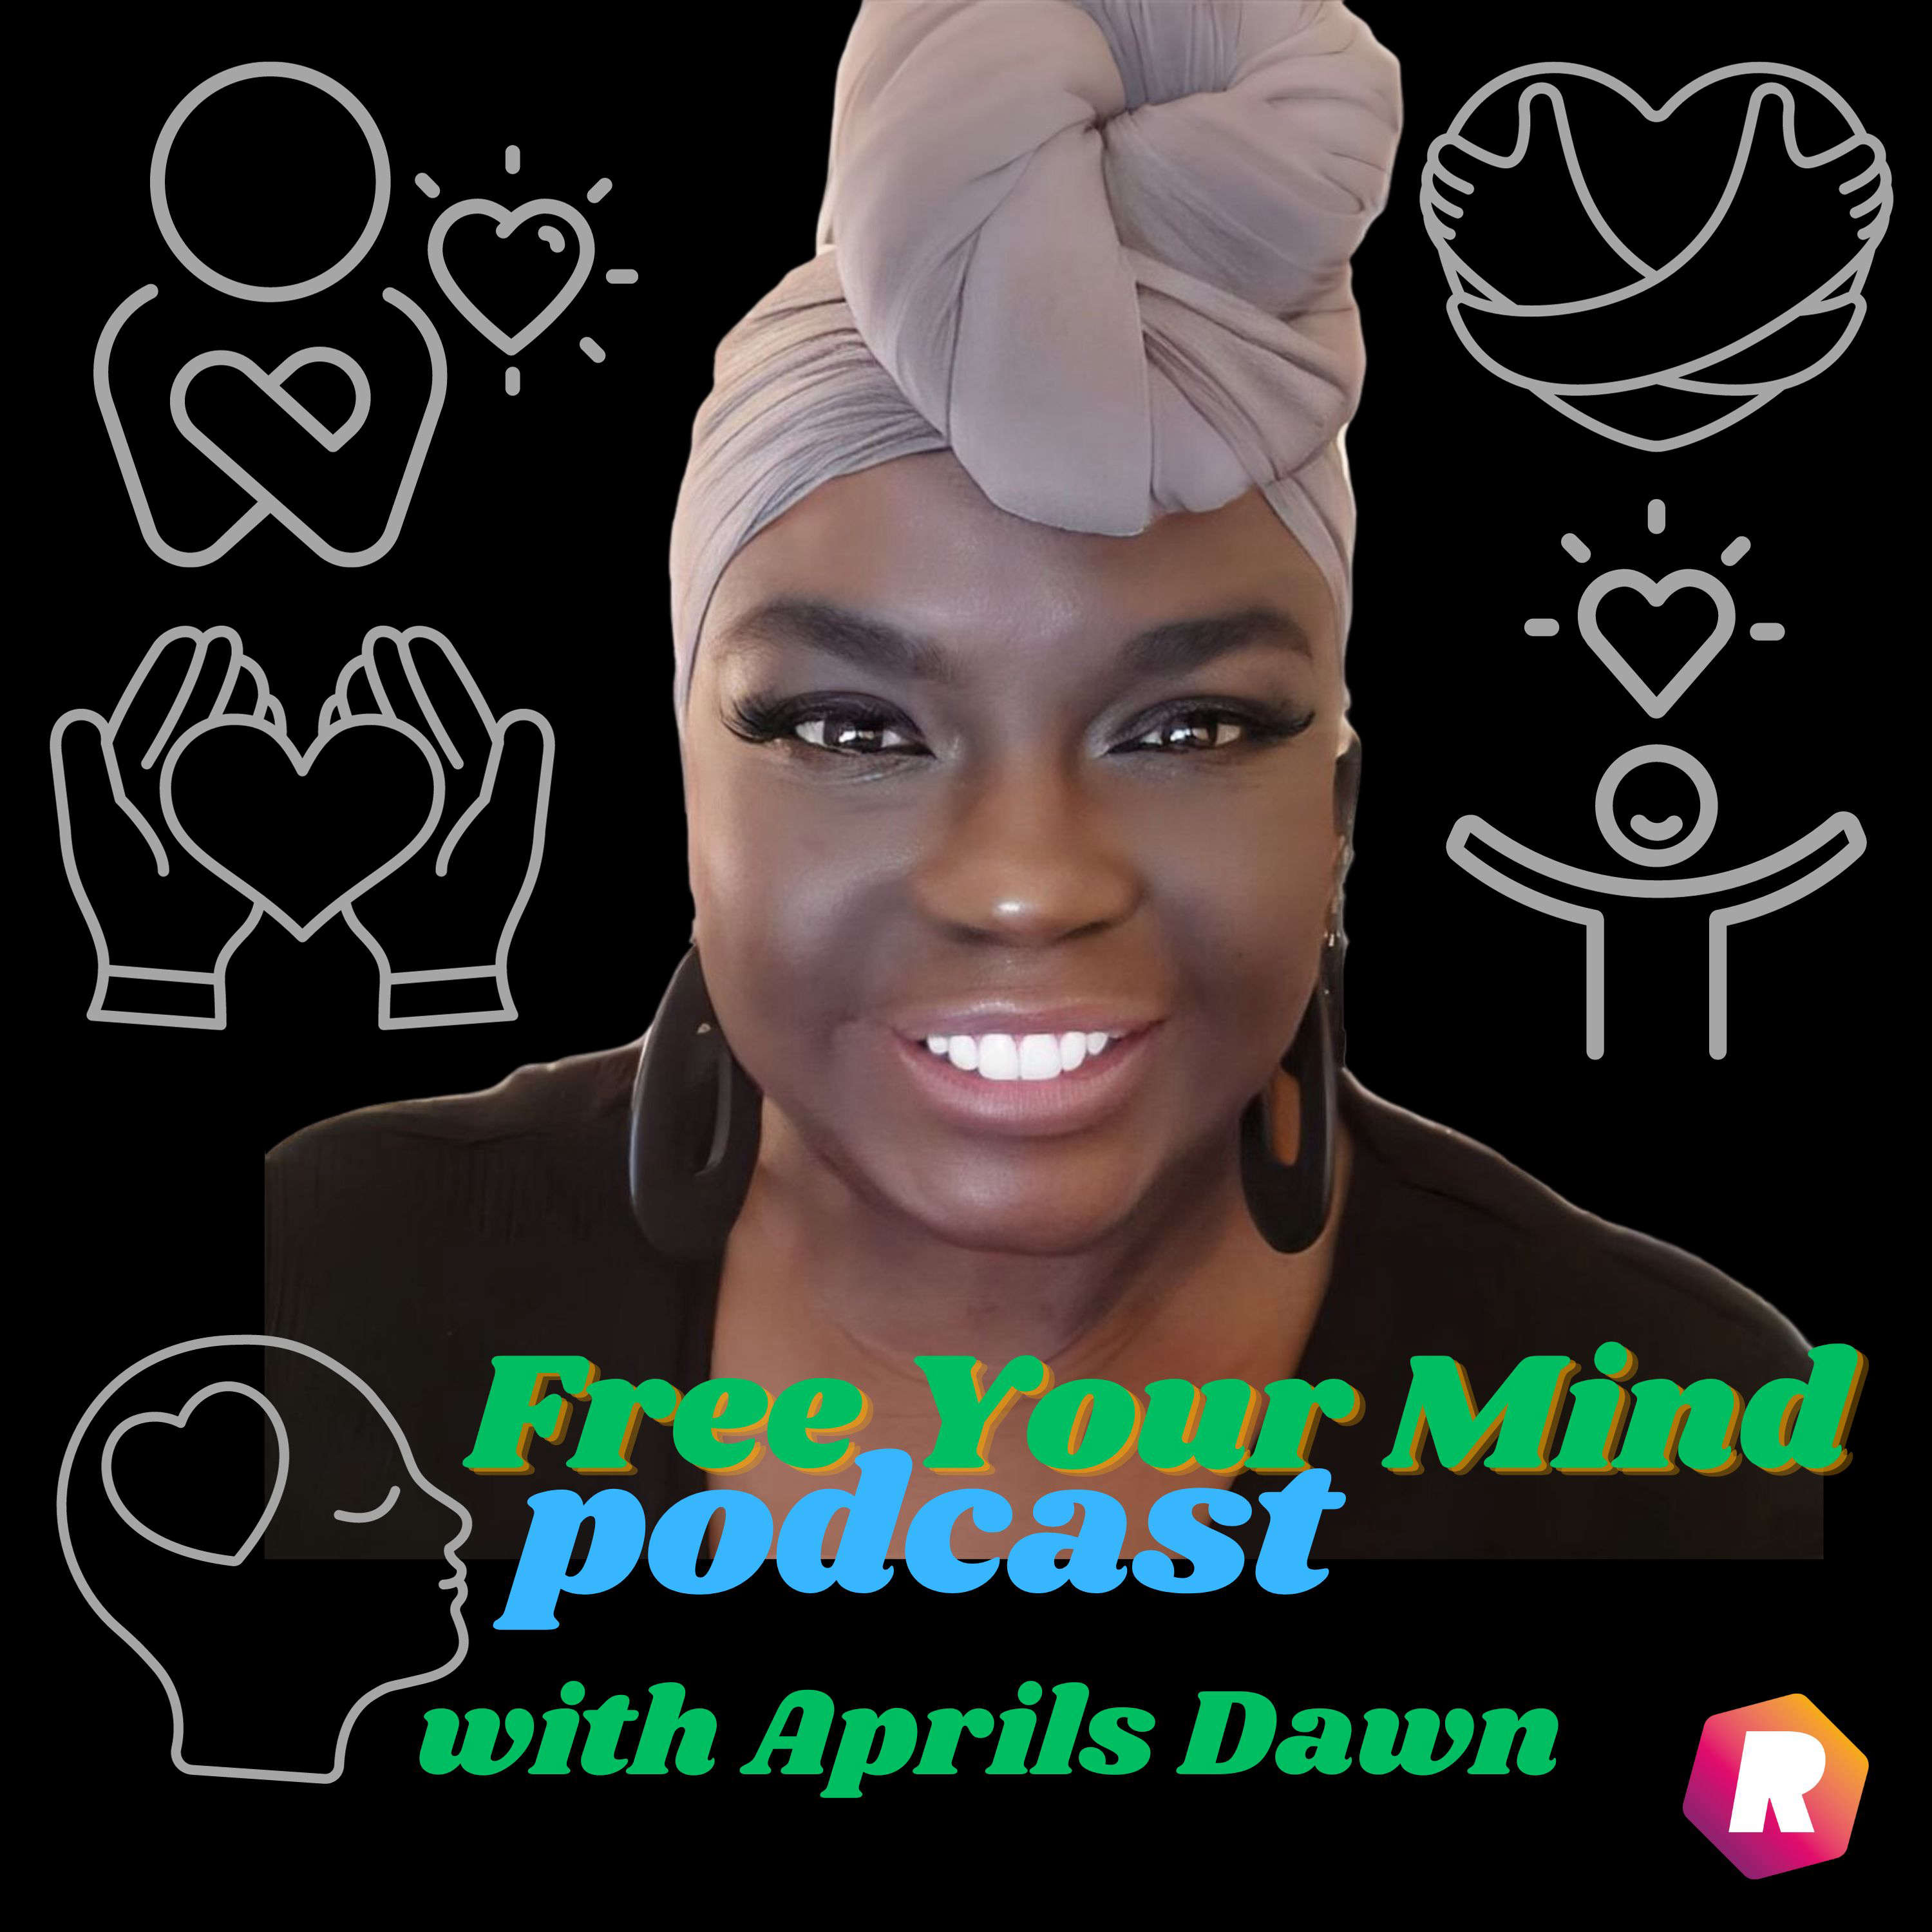 Free Your Mind with Aprils Dawn